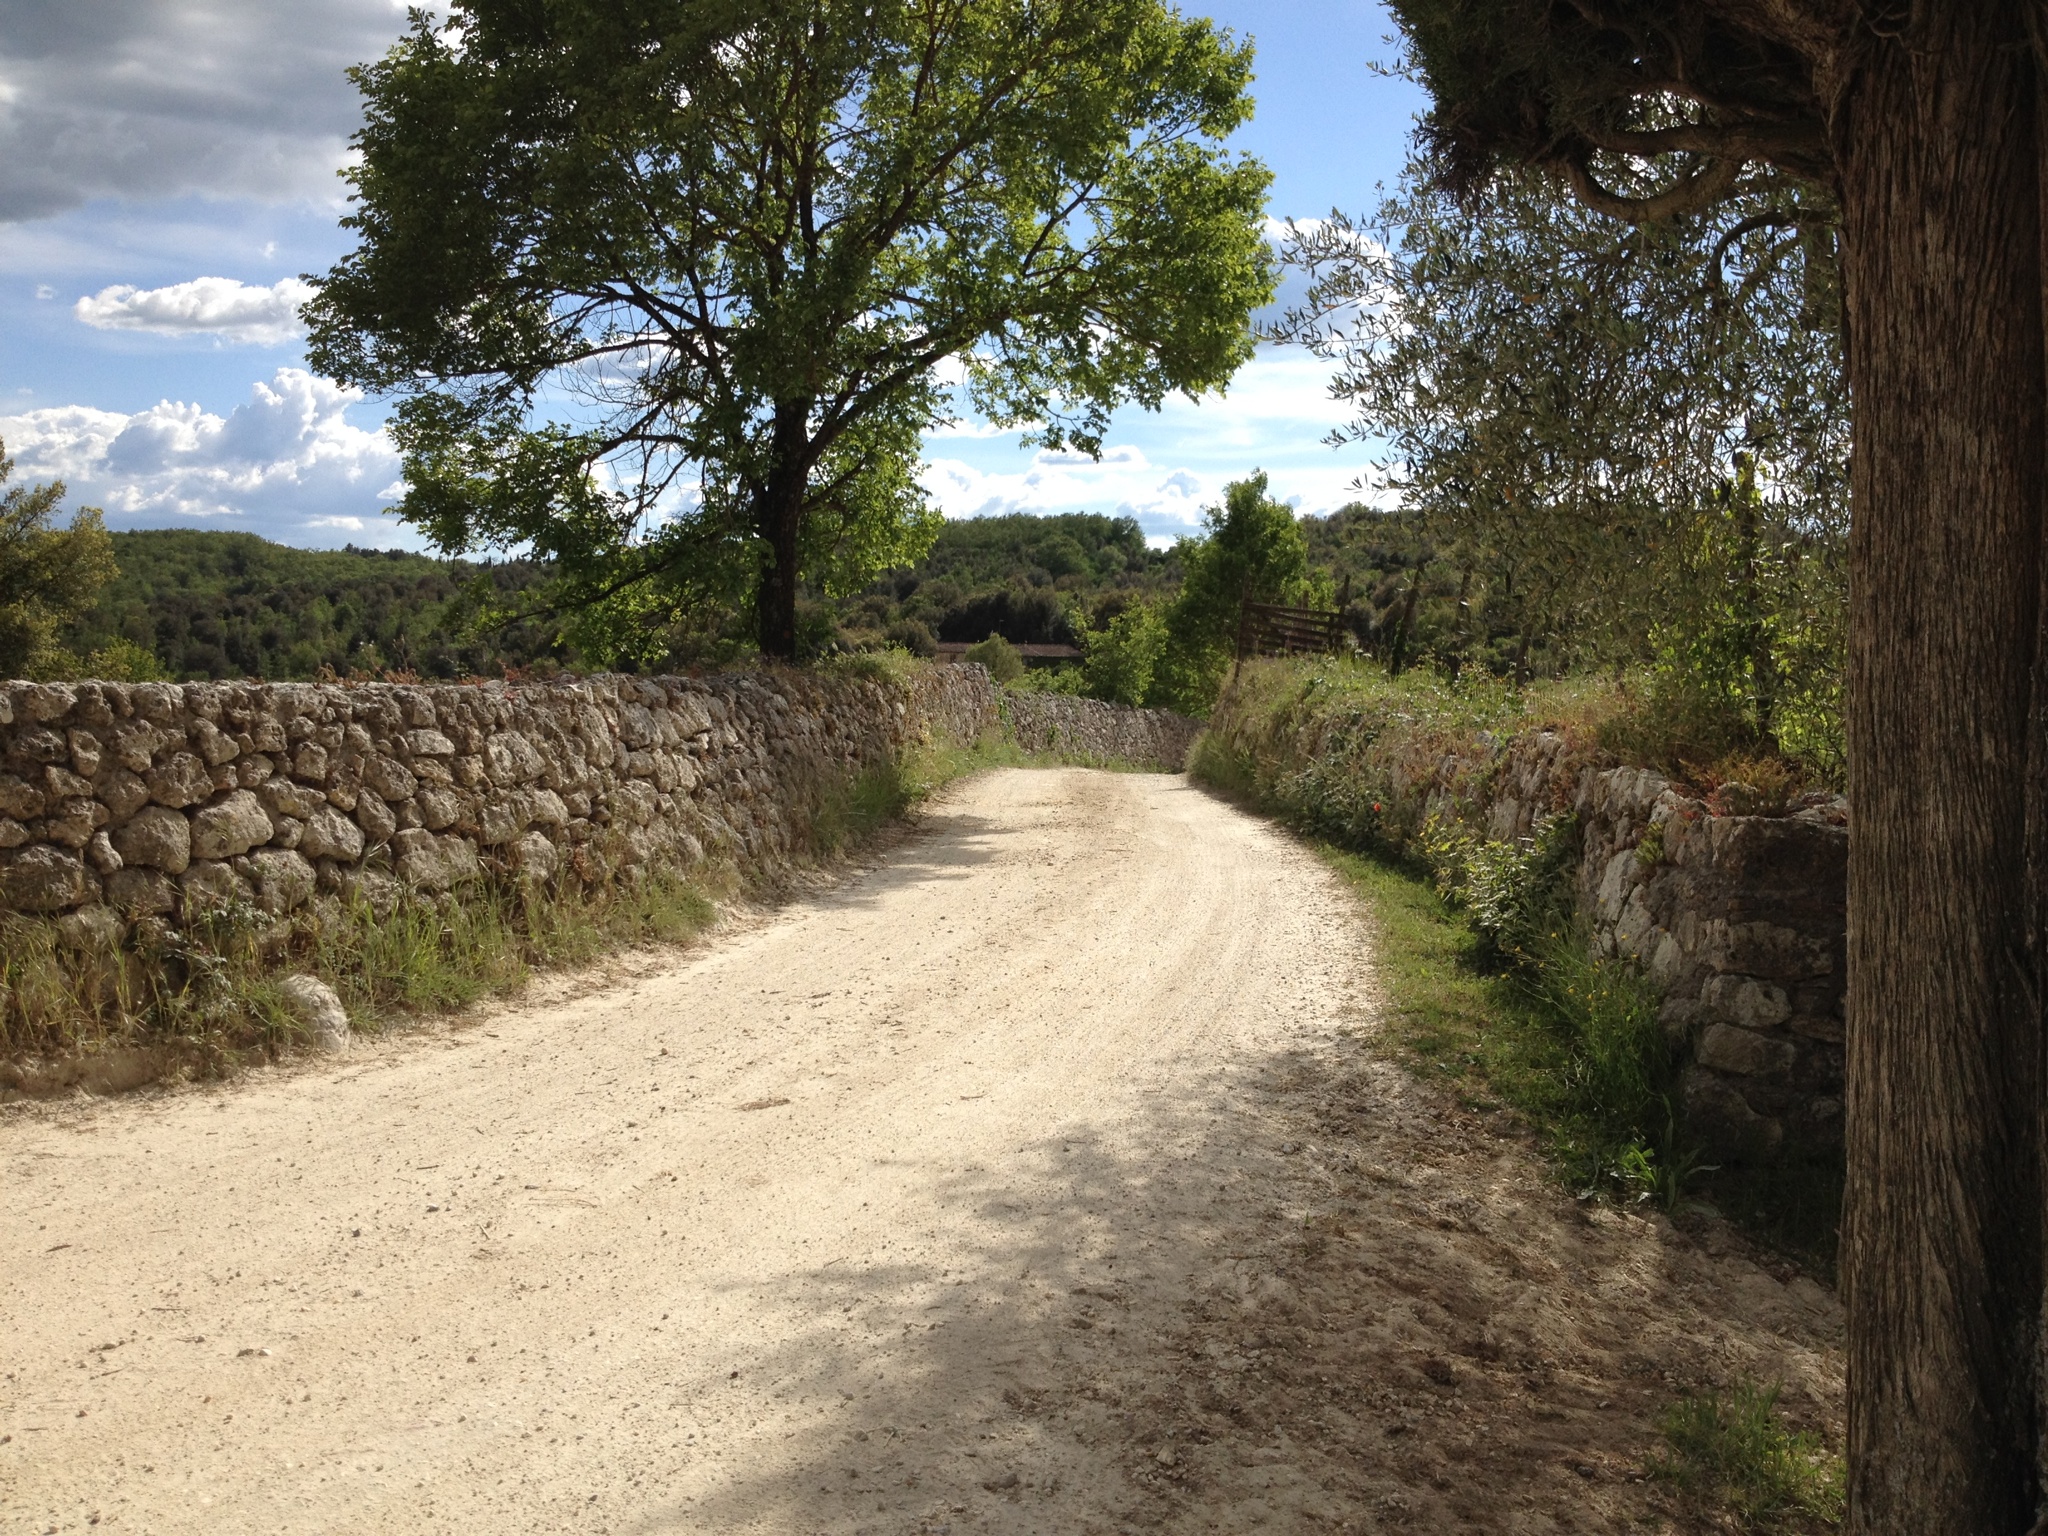 The road to the manor at Spannocchia